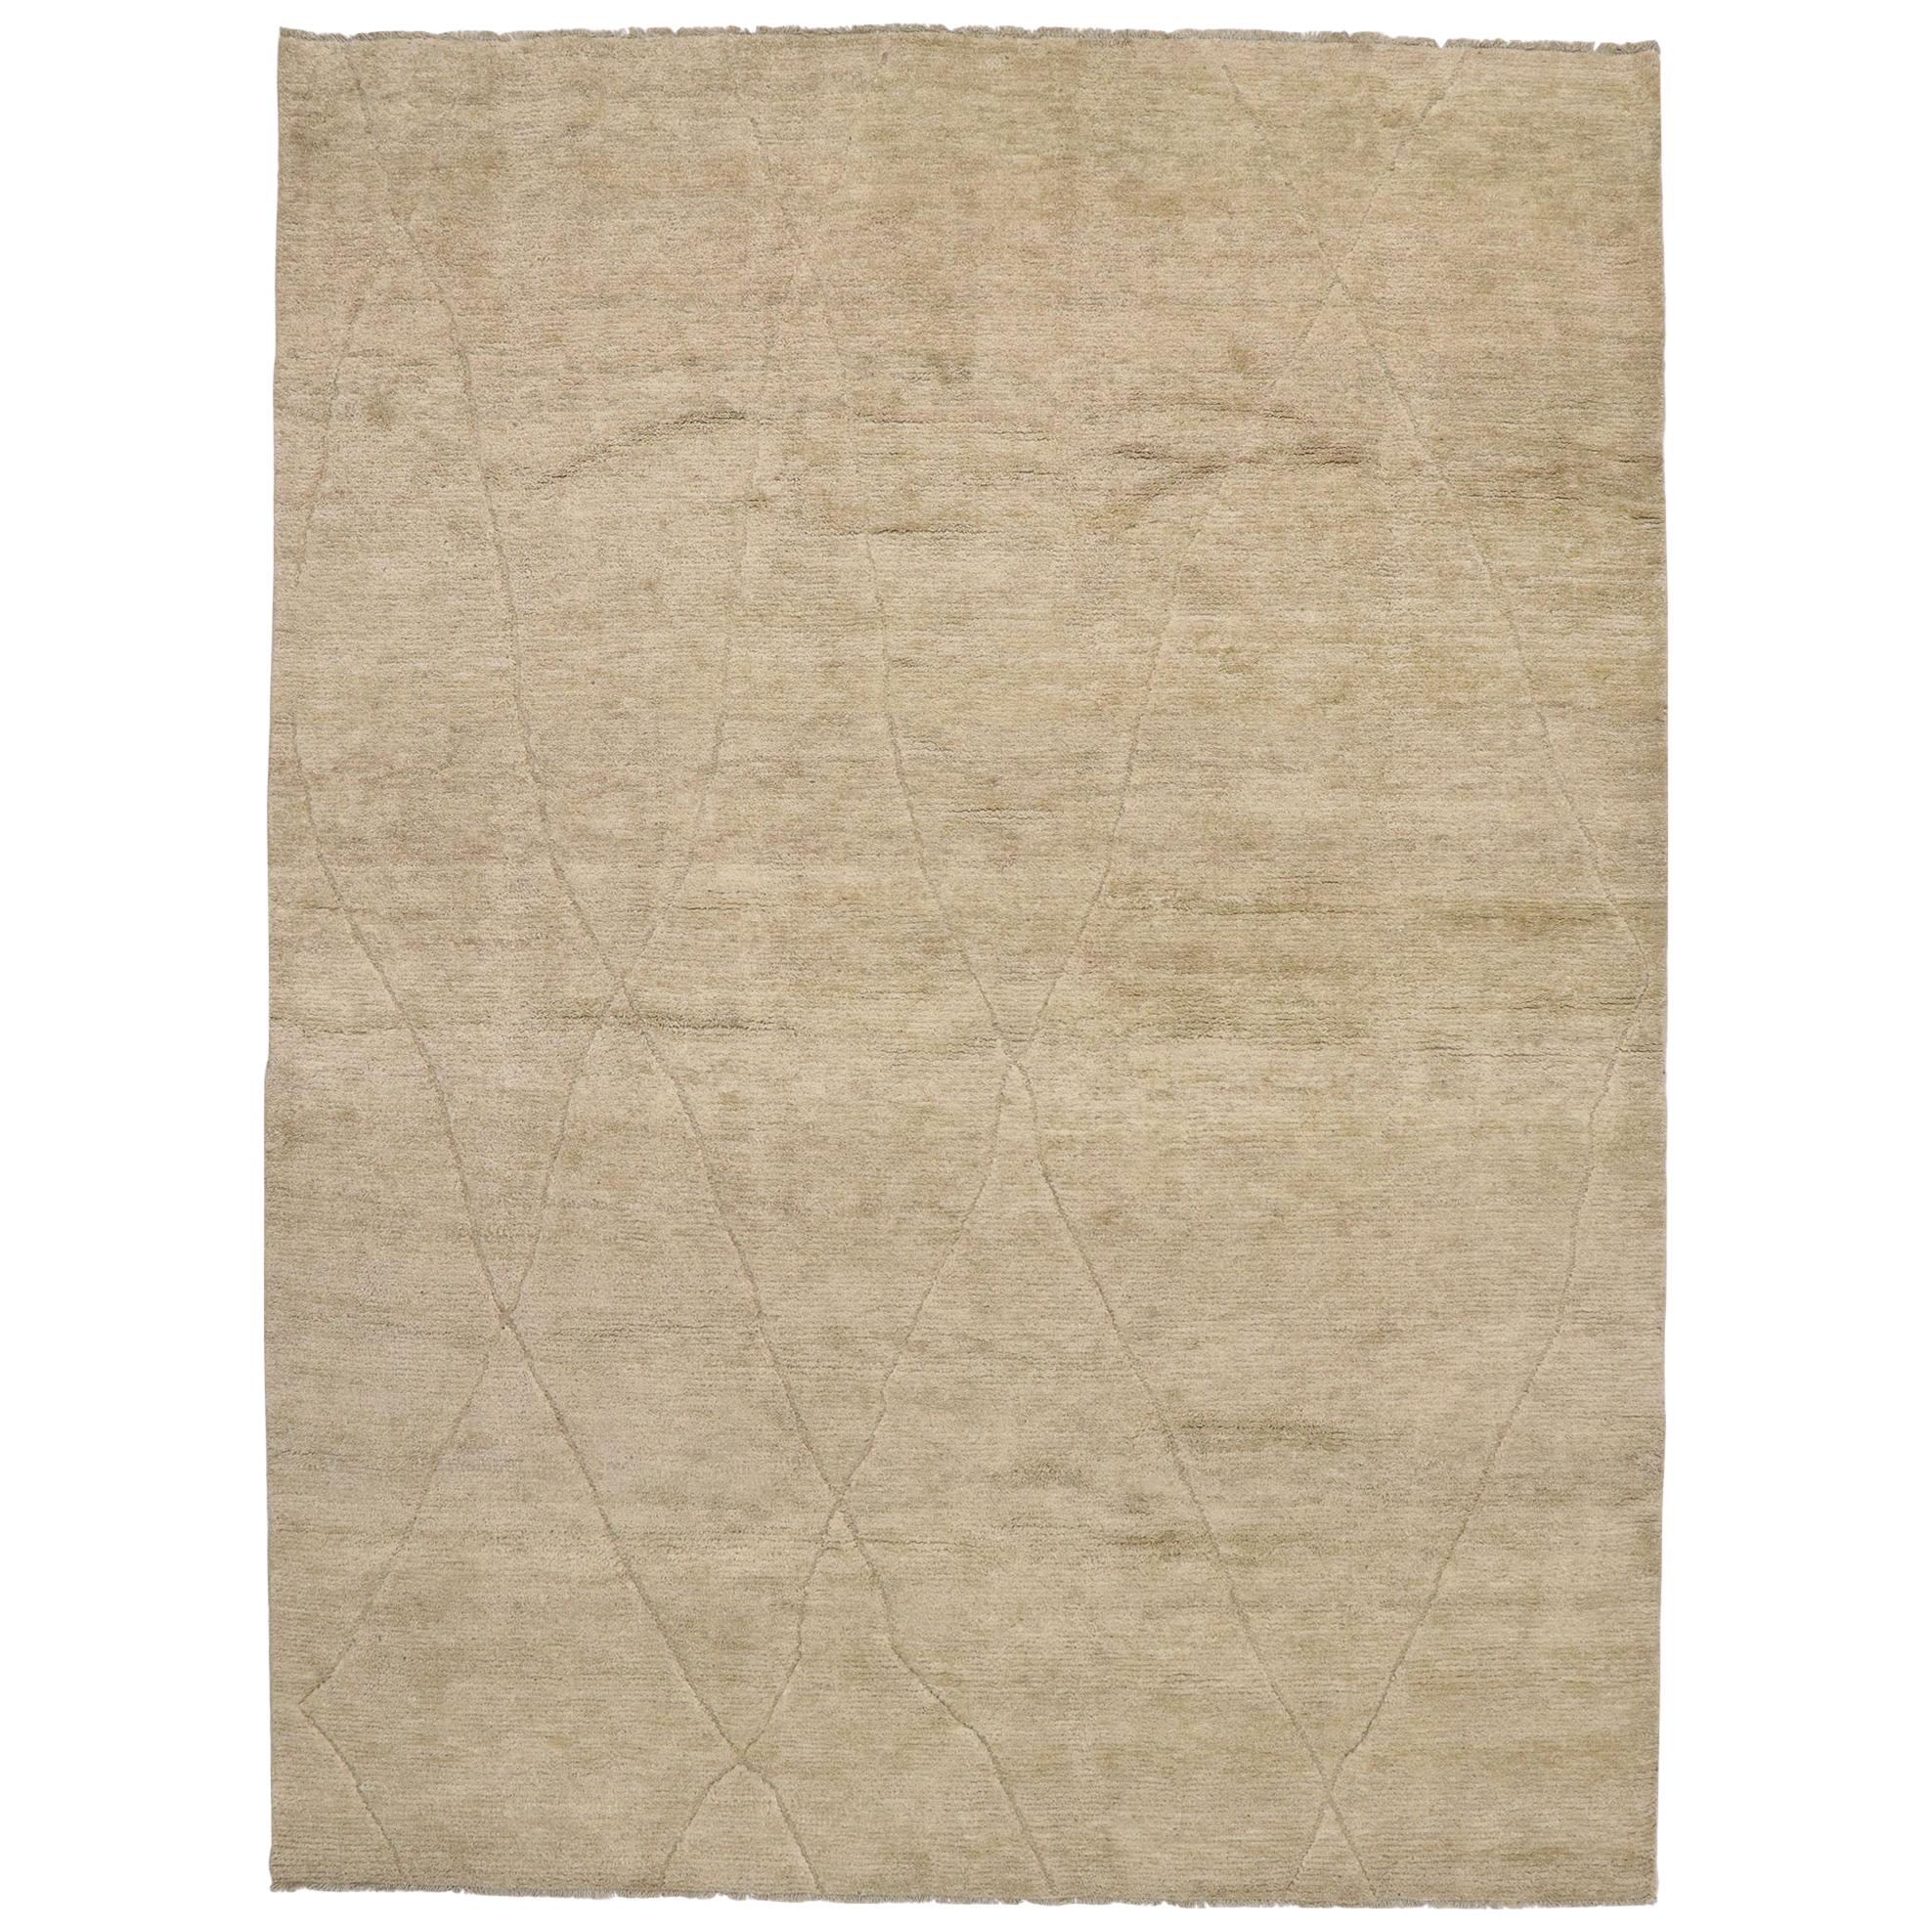 New Contemporary Moroccan Rug with Minimalist Swedish Mysigt Style